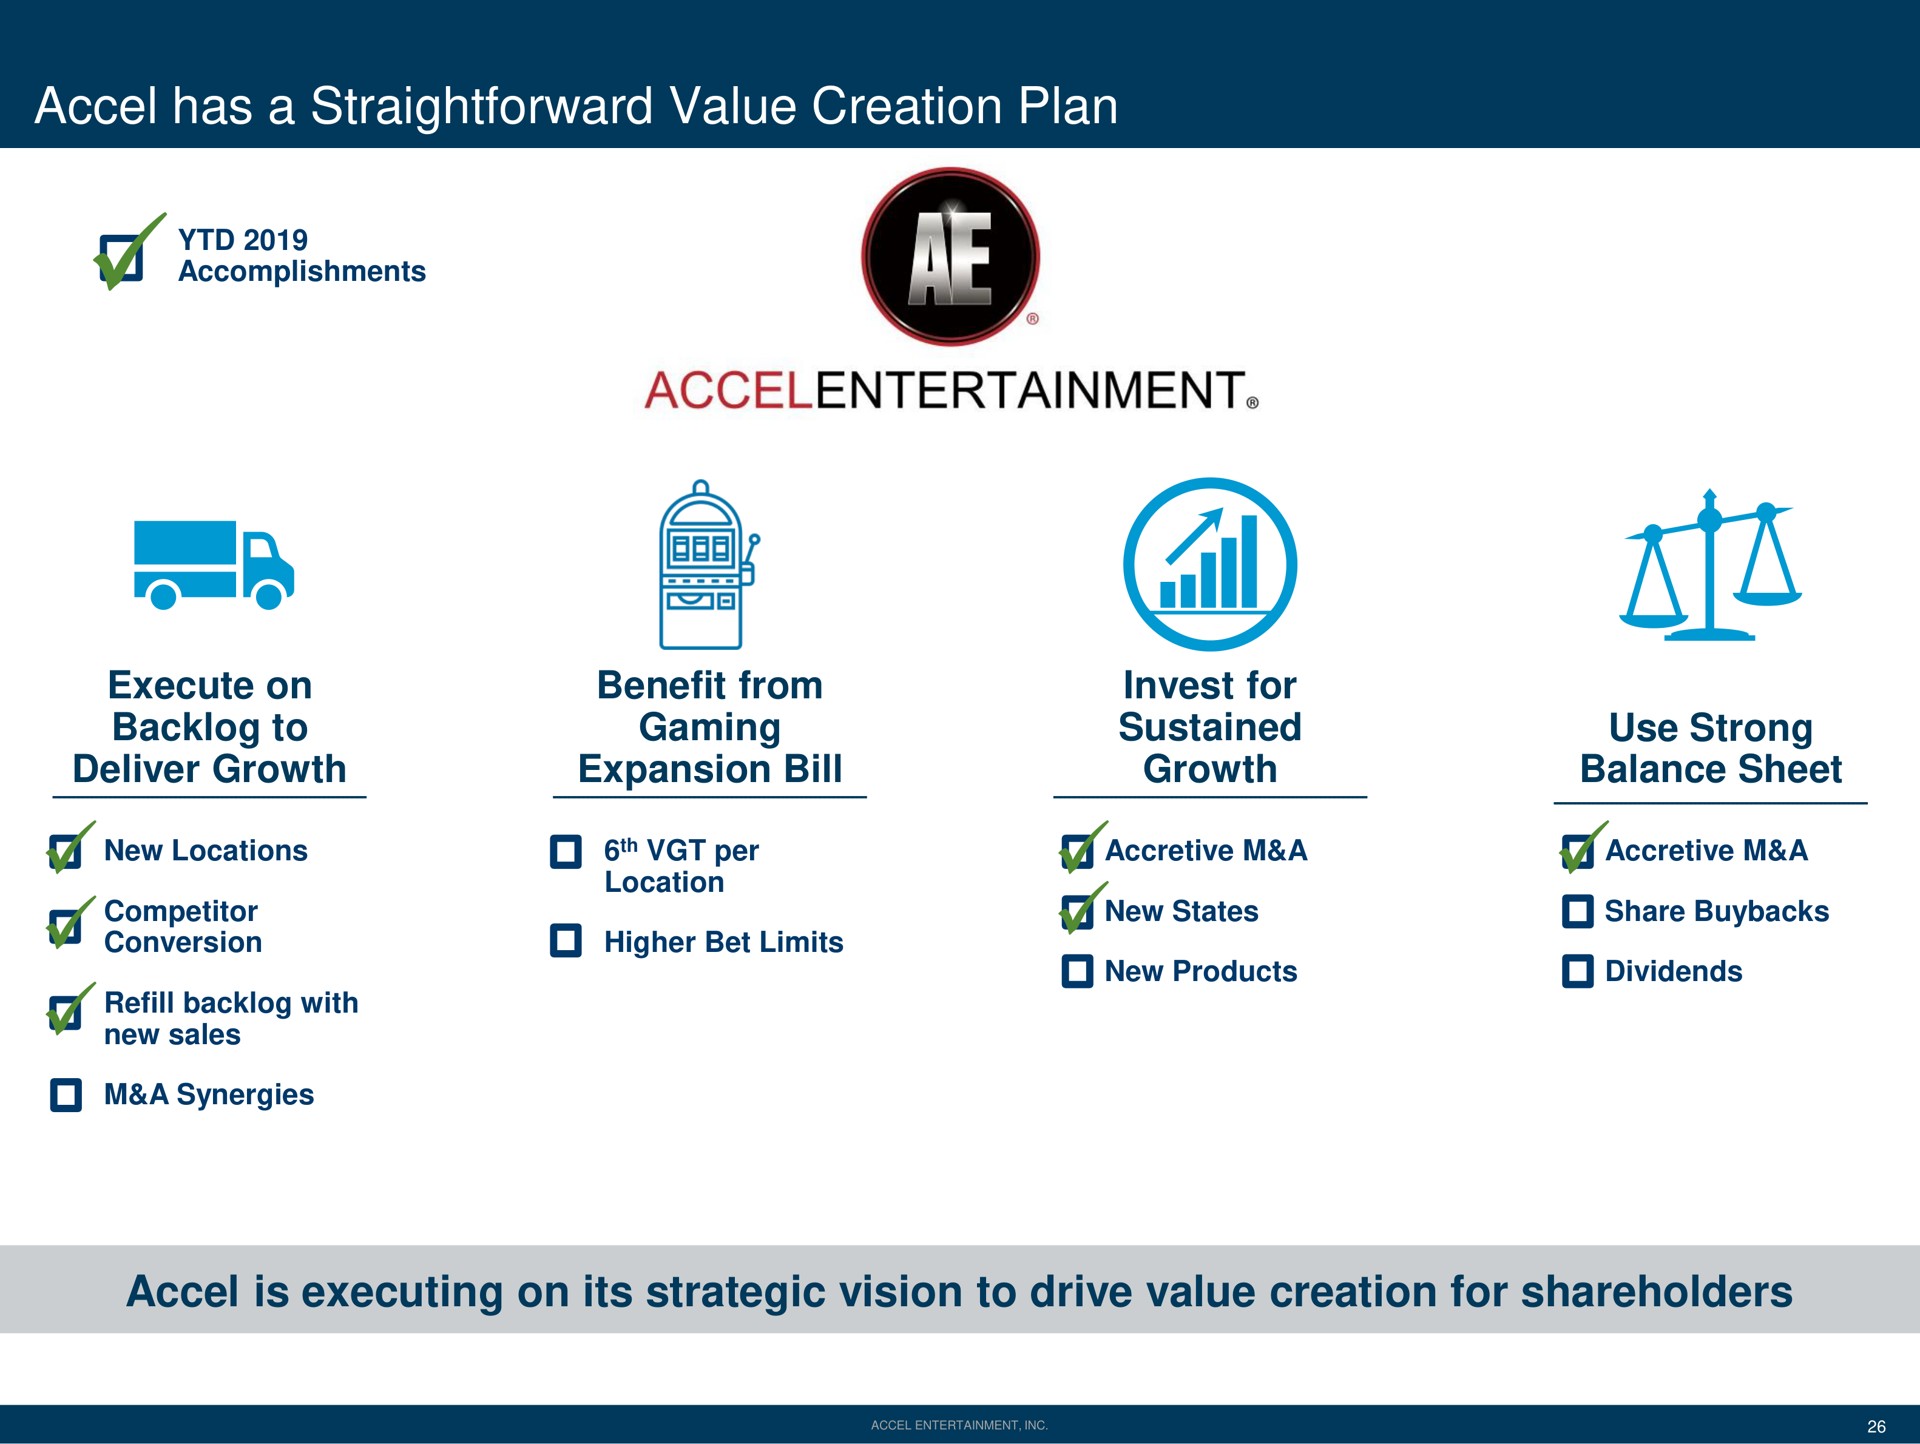 has a straightforward value creation plan execute on backlog to deliver growth benefit from gaming expansion bill invest for sustained growth use strong balance sheet is executing on its strategic vision to drive value creation for shareholders fouls refill with | Accel Entertaiment